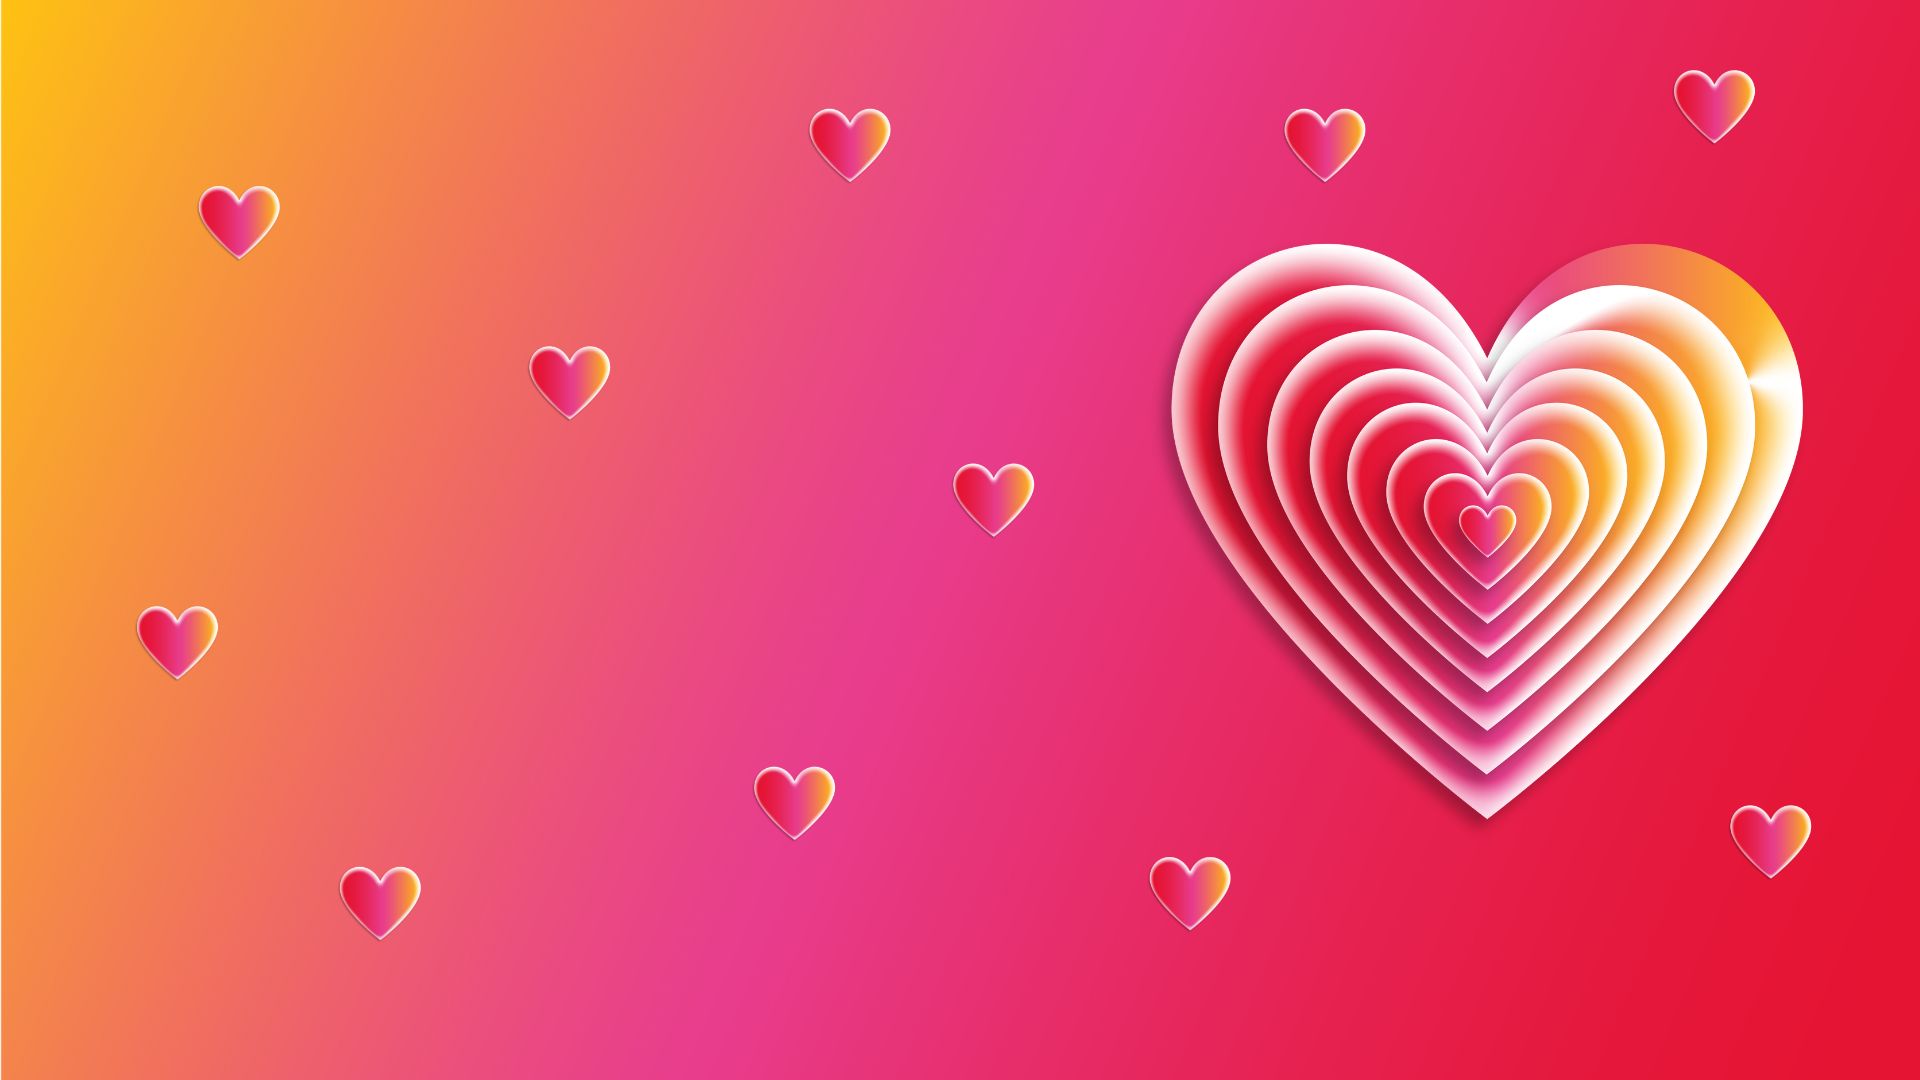 Valentine's Day Background Images (6)